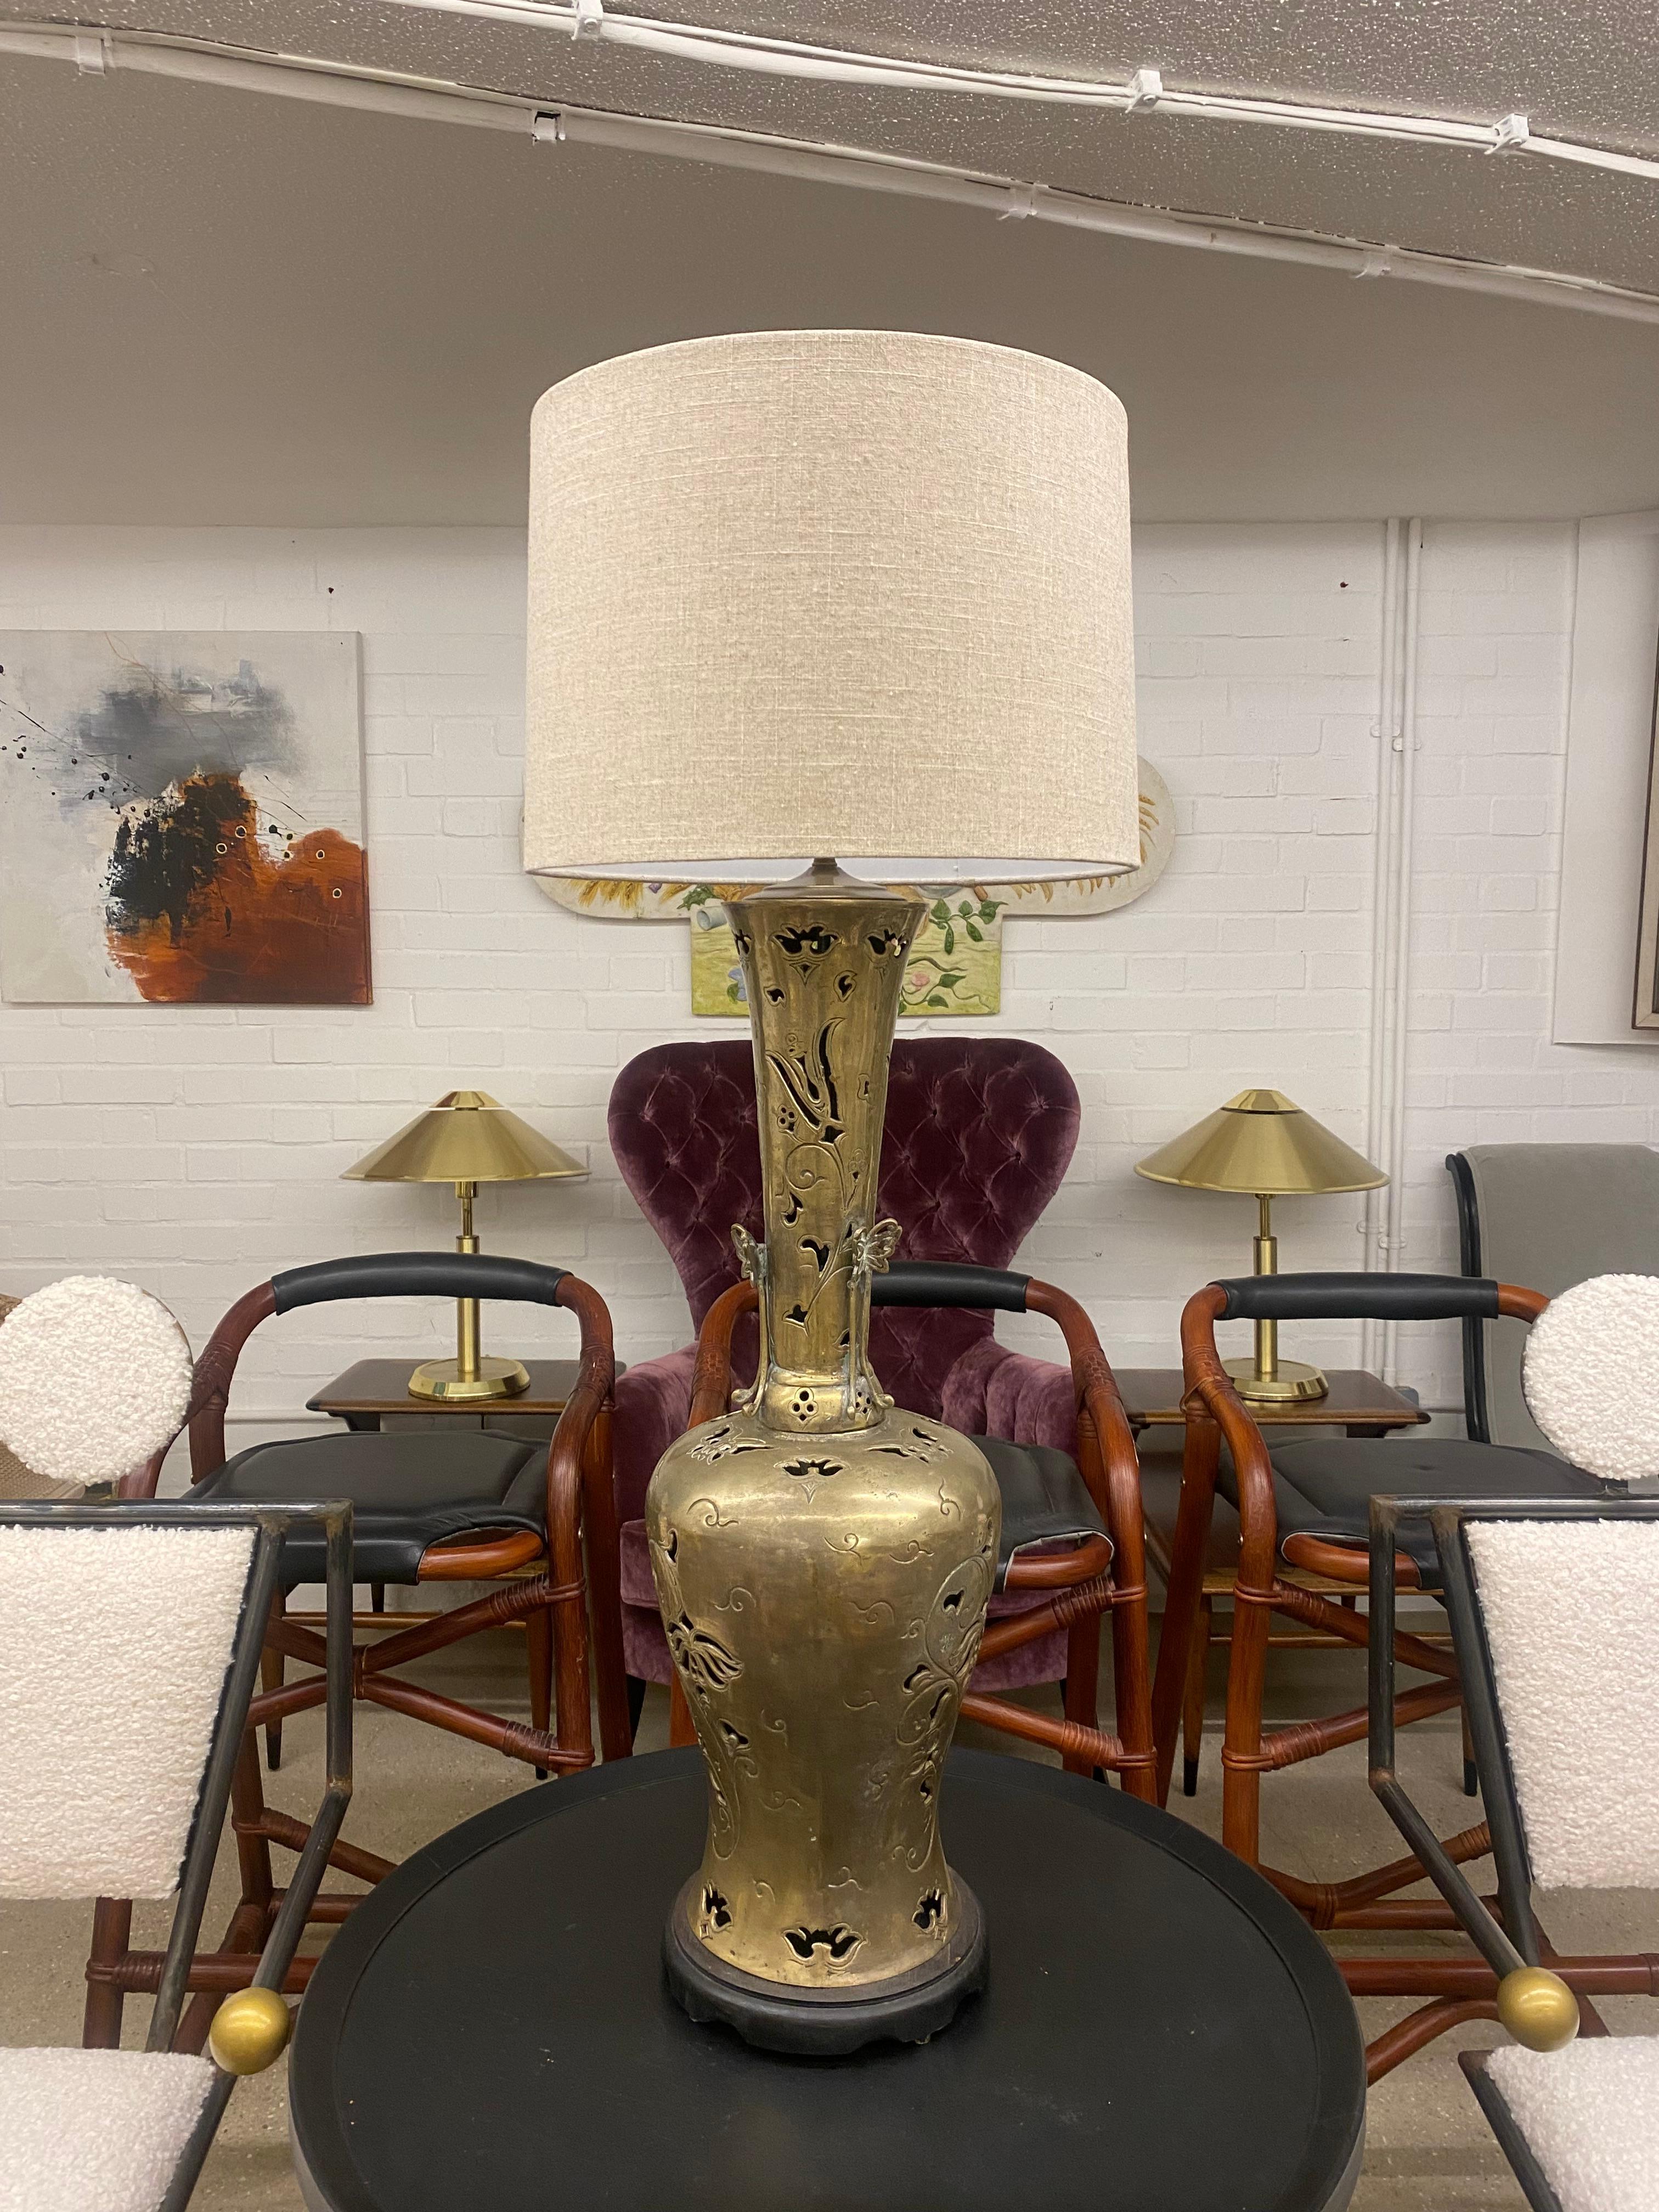 American, Art Deco Large Brass Table Lamp With Organic Carvings For Sale 2